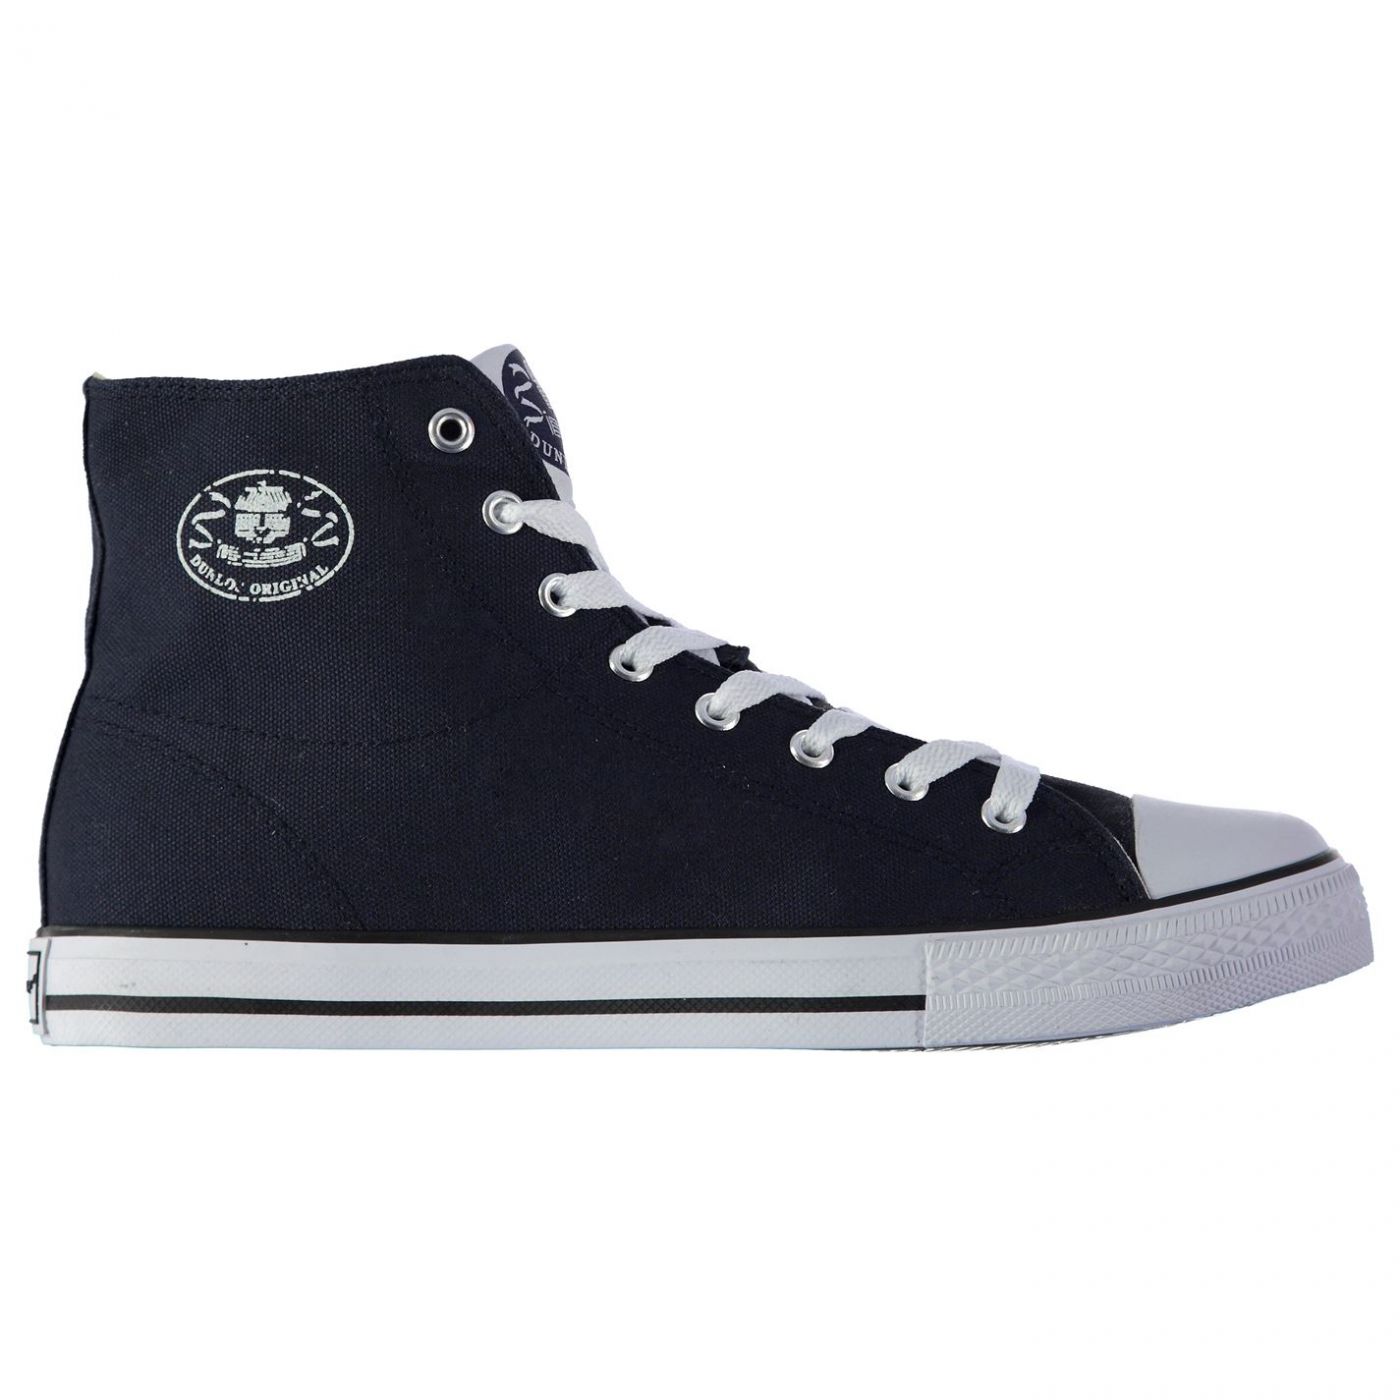 Dunlop Canvas High Top Trainers